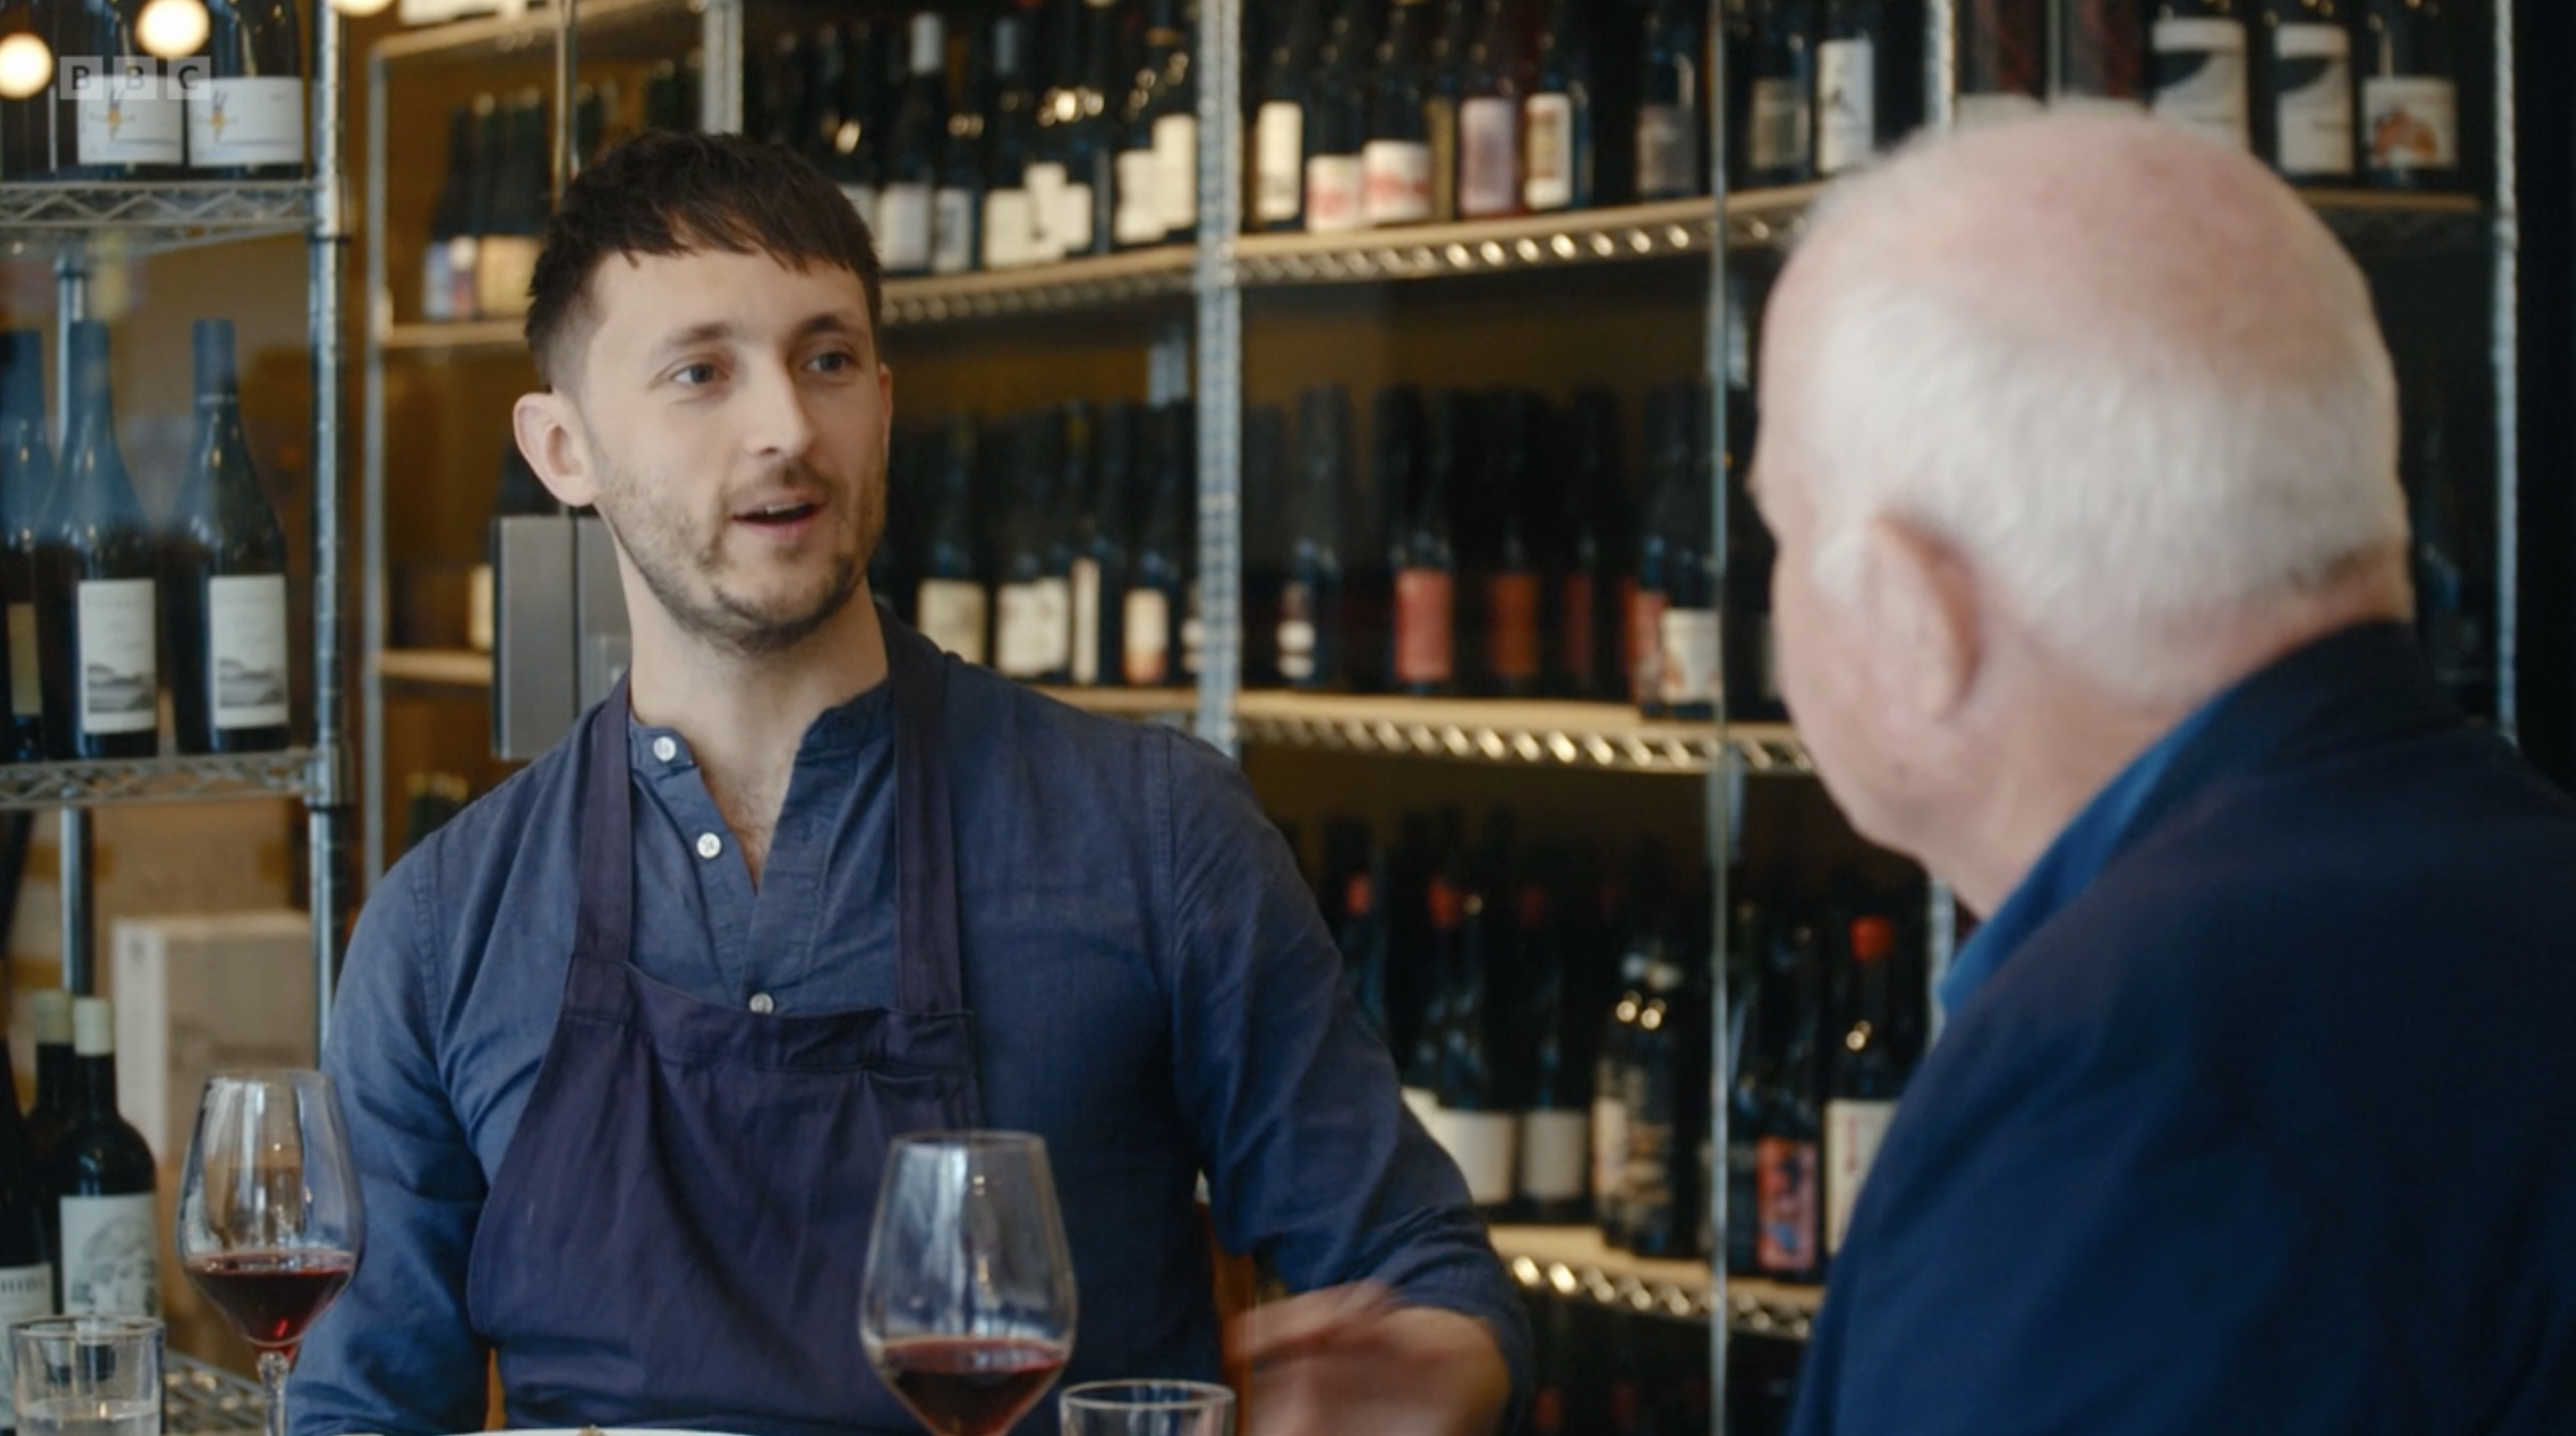 Higher Ground chef Joseph Otway chatting to Rick Stein in his Manchester episode of his new BBC series. Credit: BBC